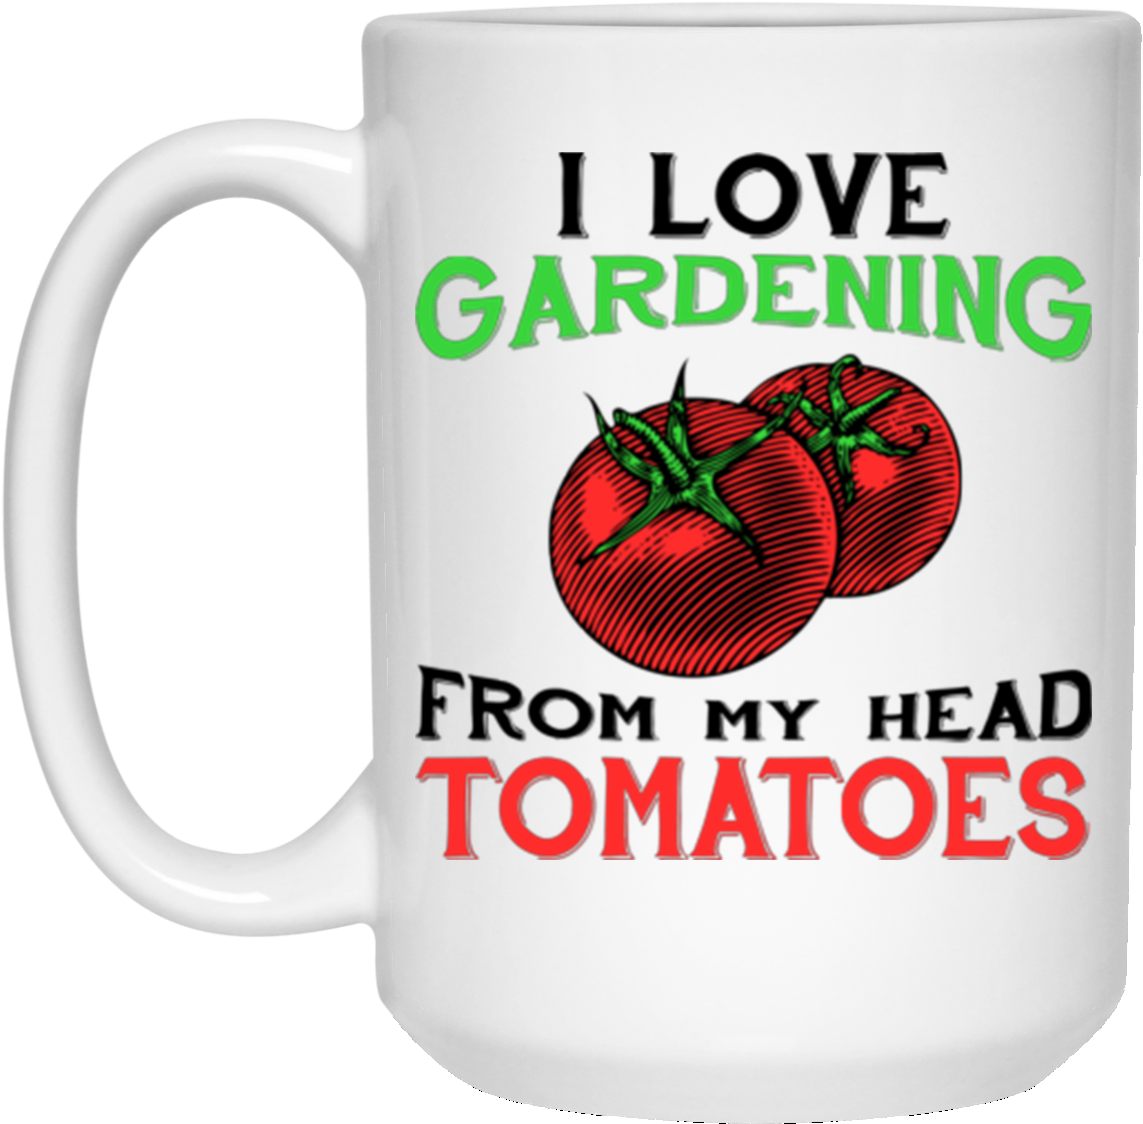 I Love Gardening From My Head Tomatoes White Mug - Am 20 + Middle Finger Funny 21st Birthday T-shirt (1155x1155)